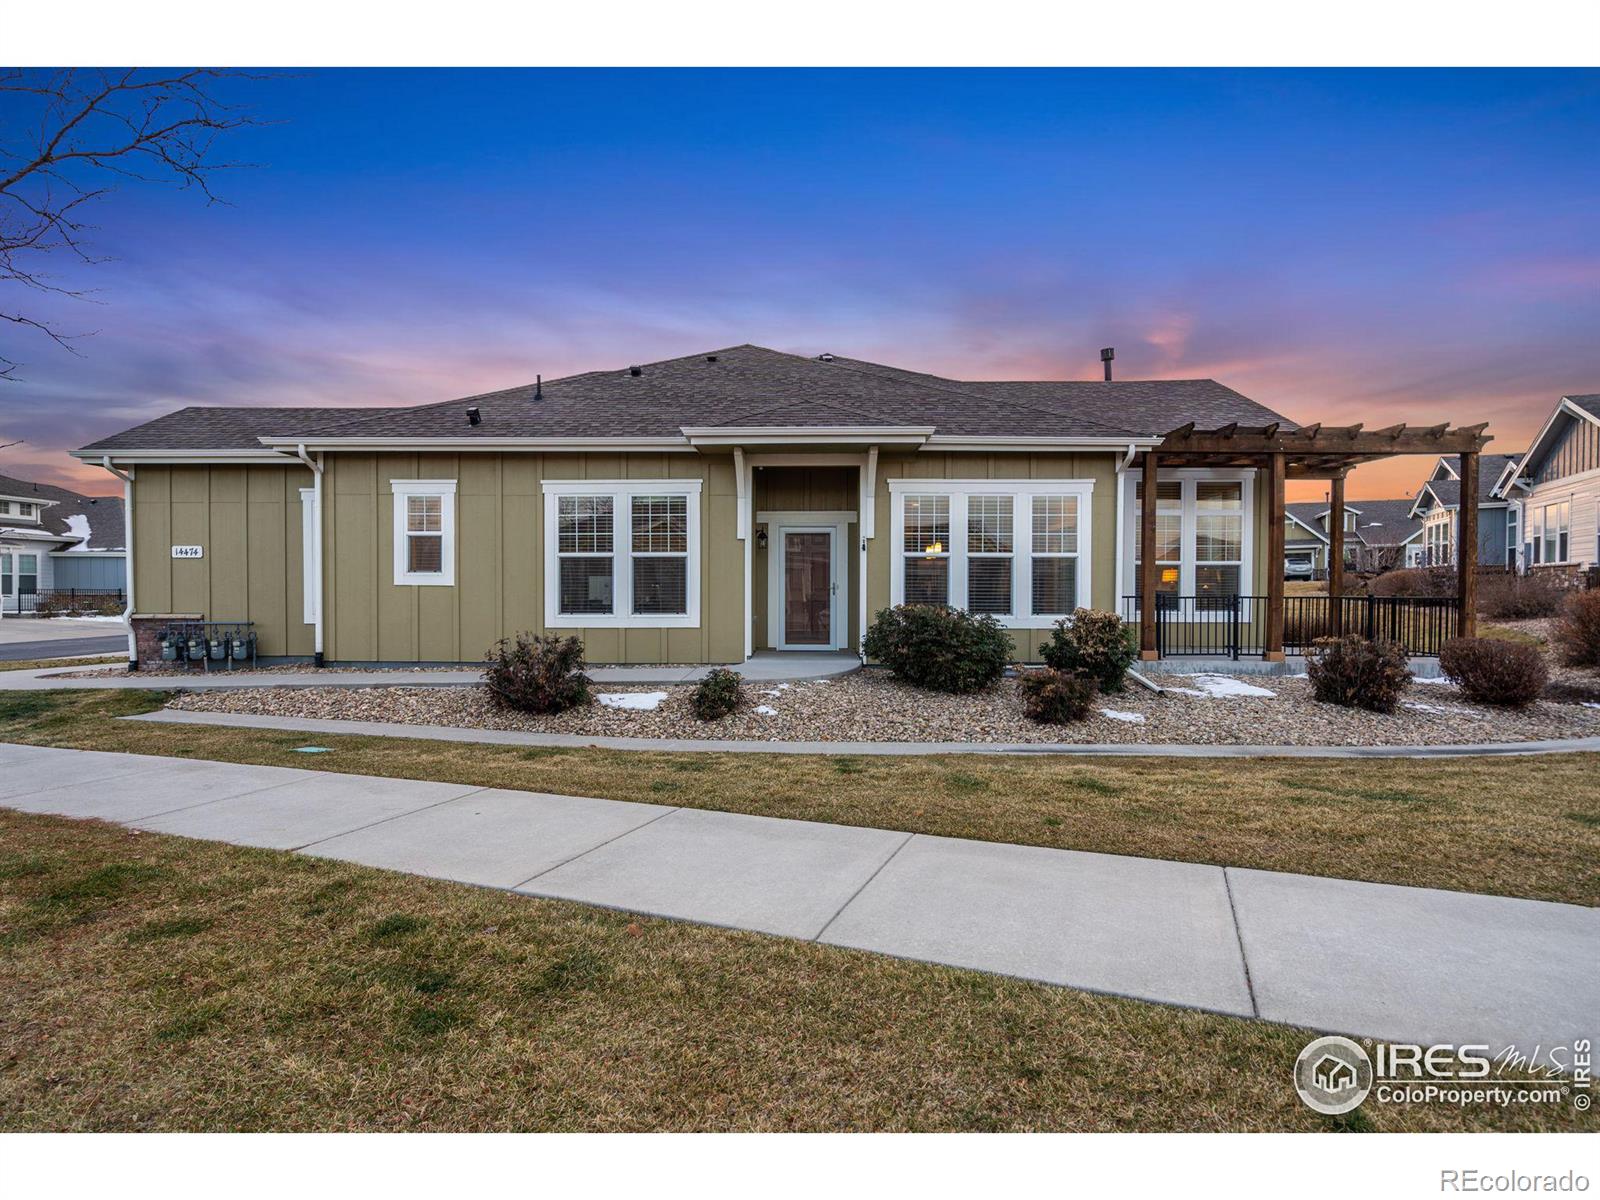 14474 W 88th Drive, arvada MLS: 4567891000425 Beds: 2 Baths: 2 Price: $600,000